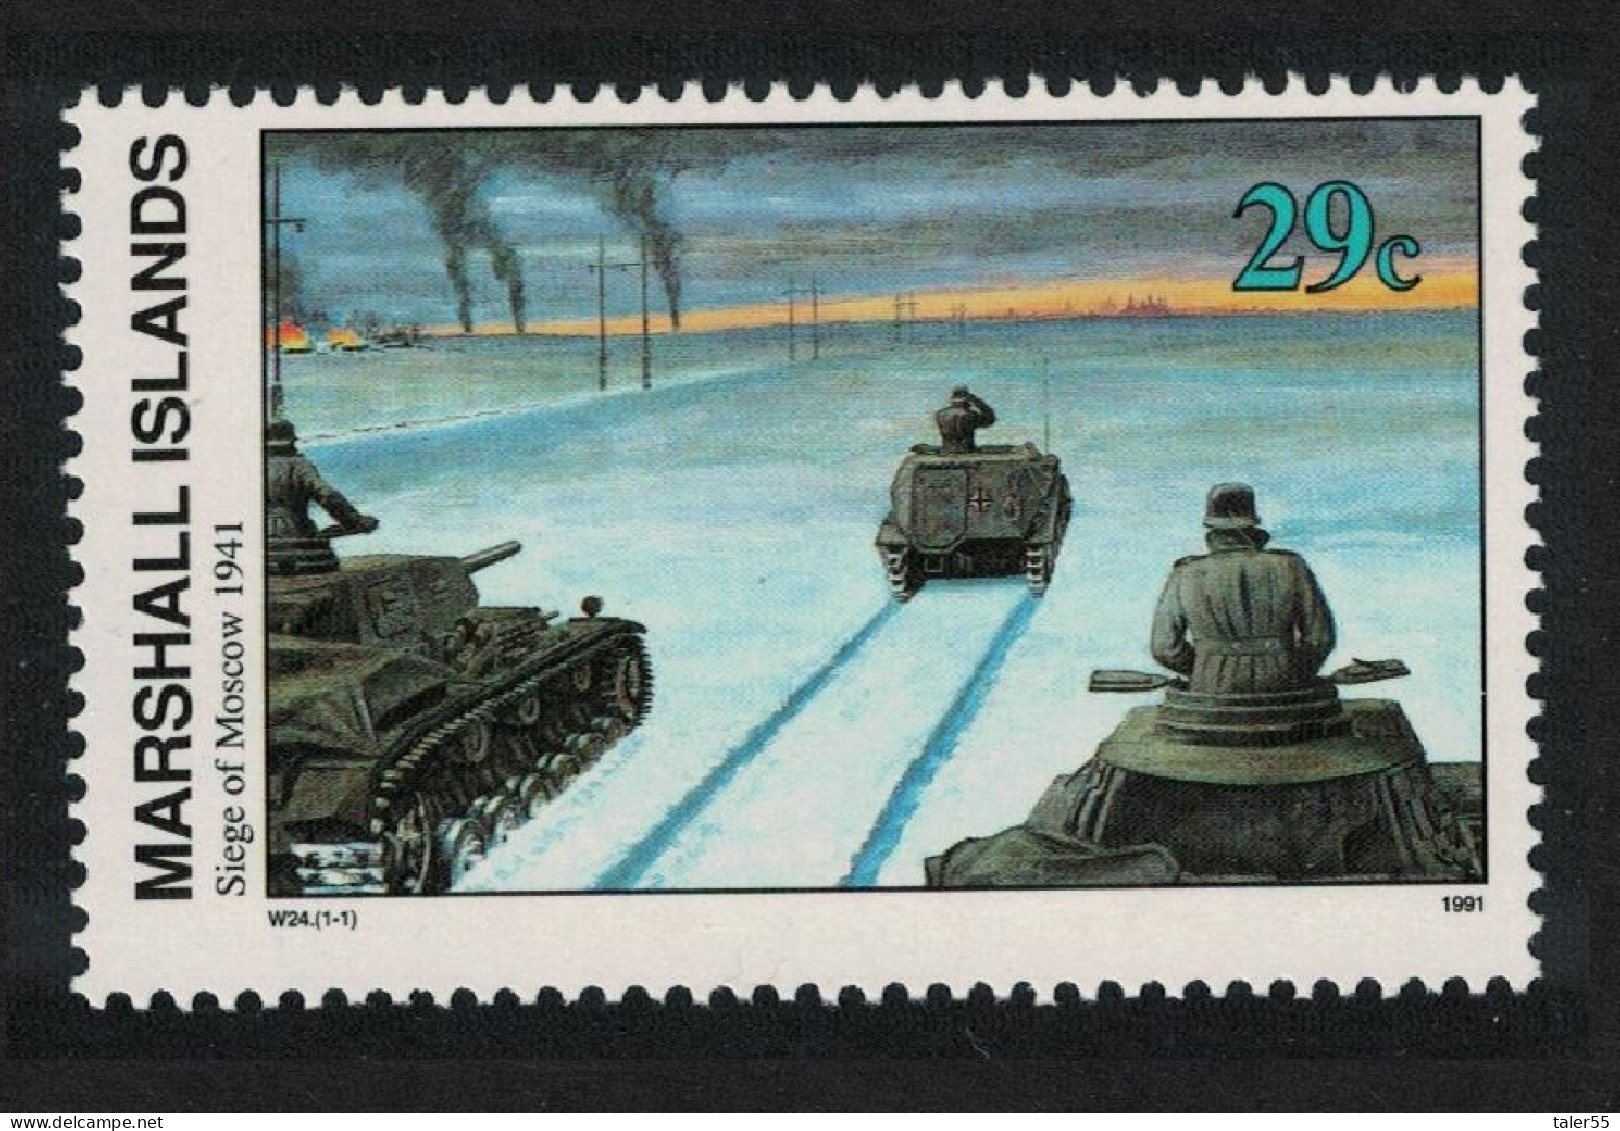 Marshall Is. Siege Of Moscow 1941 WWII 1991 MNH SG#373 - Marshall